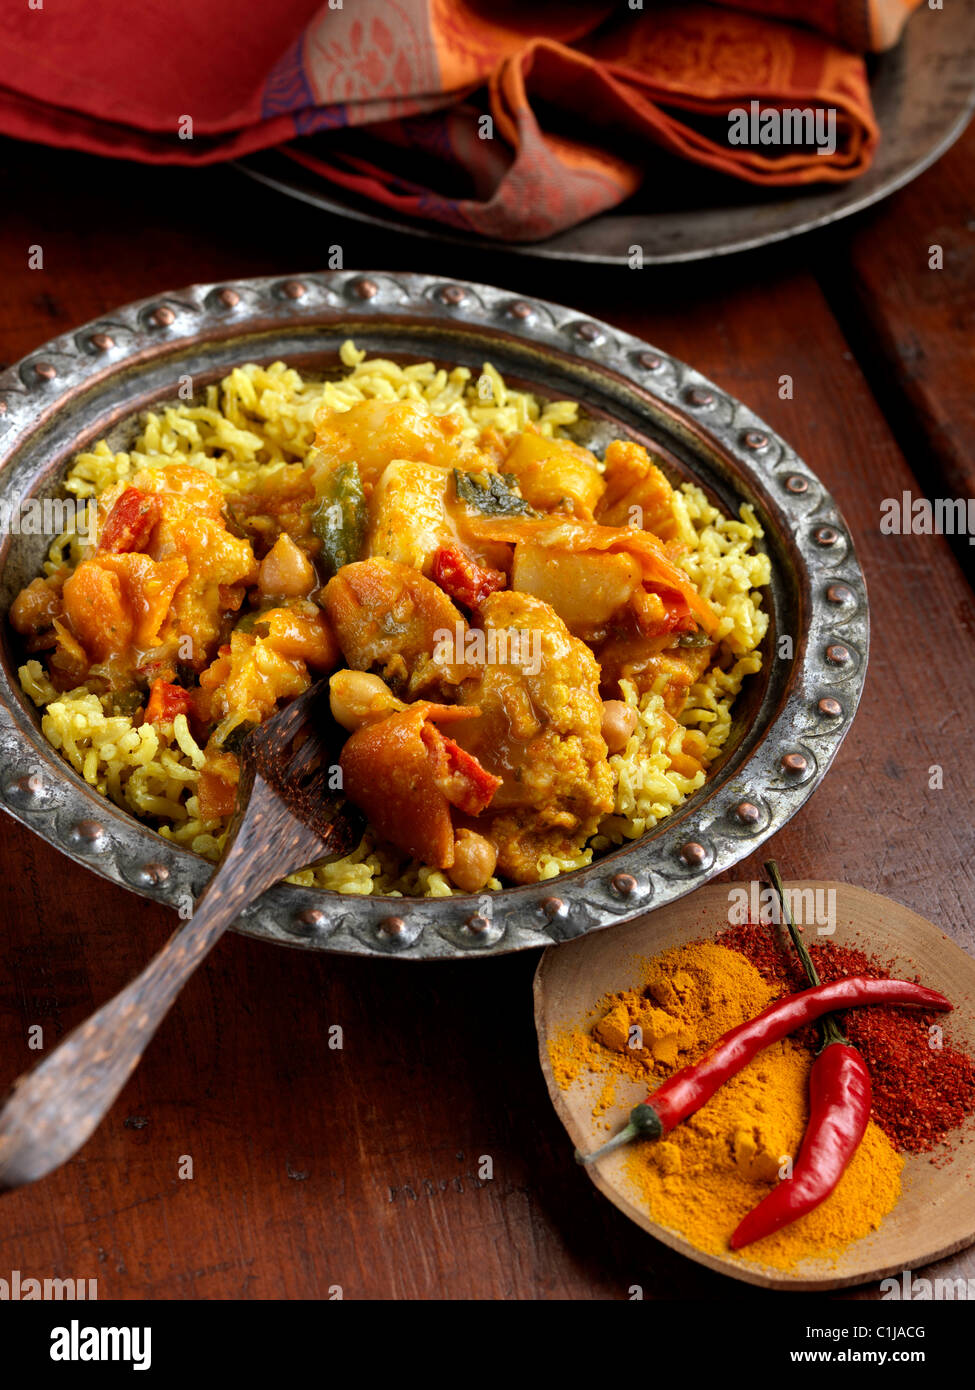 Vegetable curry vegetarian Indian main meals Stock Photo